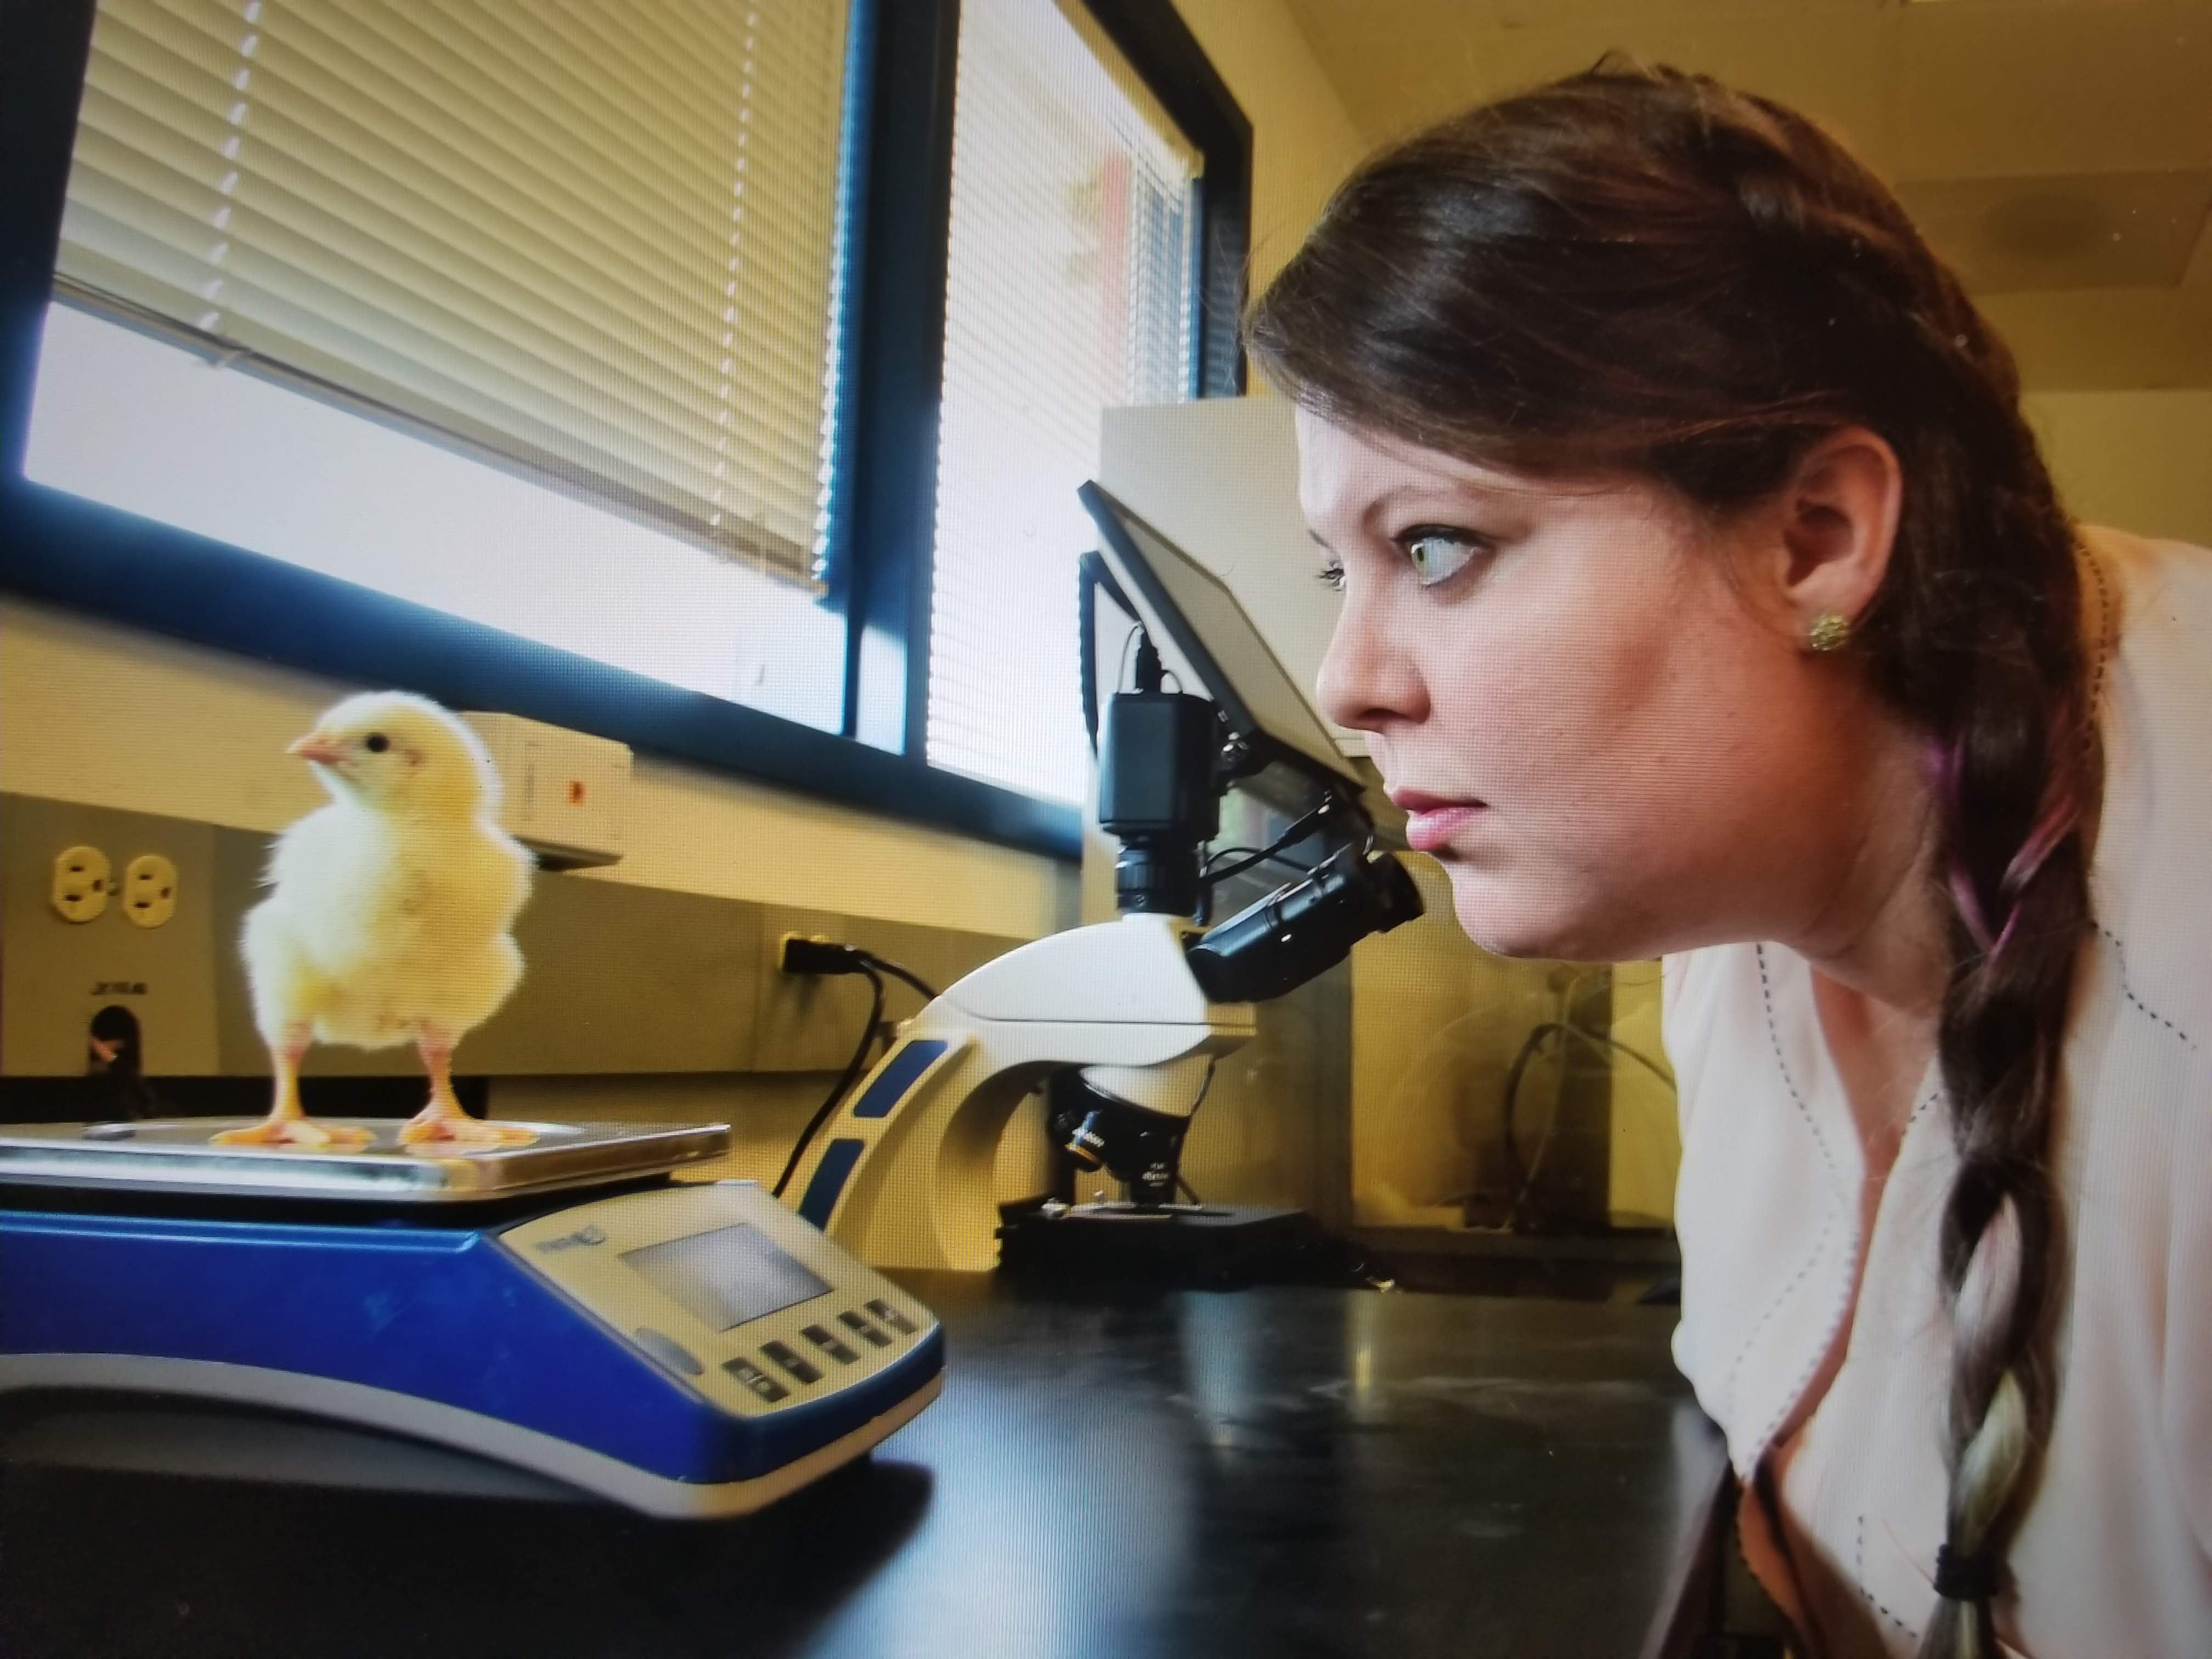  A picture of the professor looking at the baby chicken